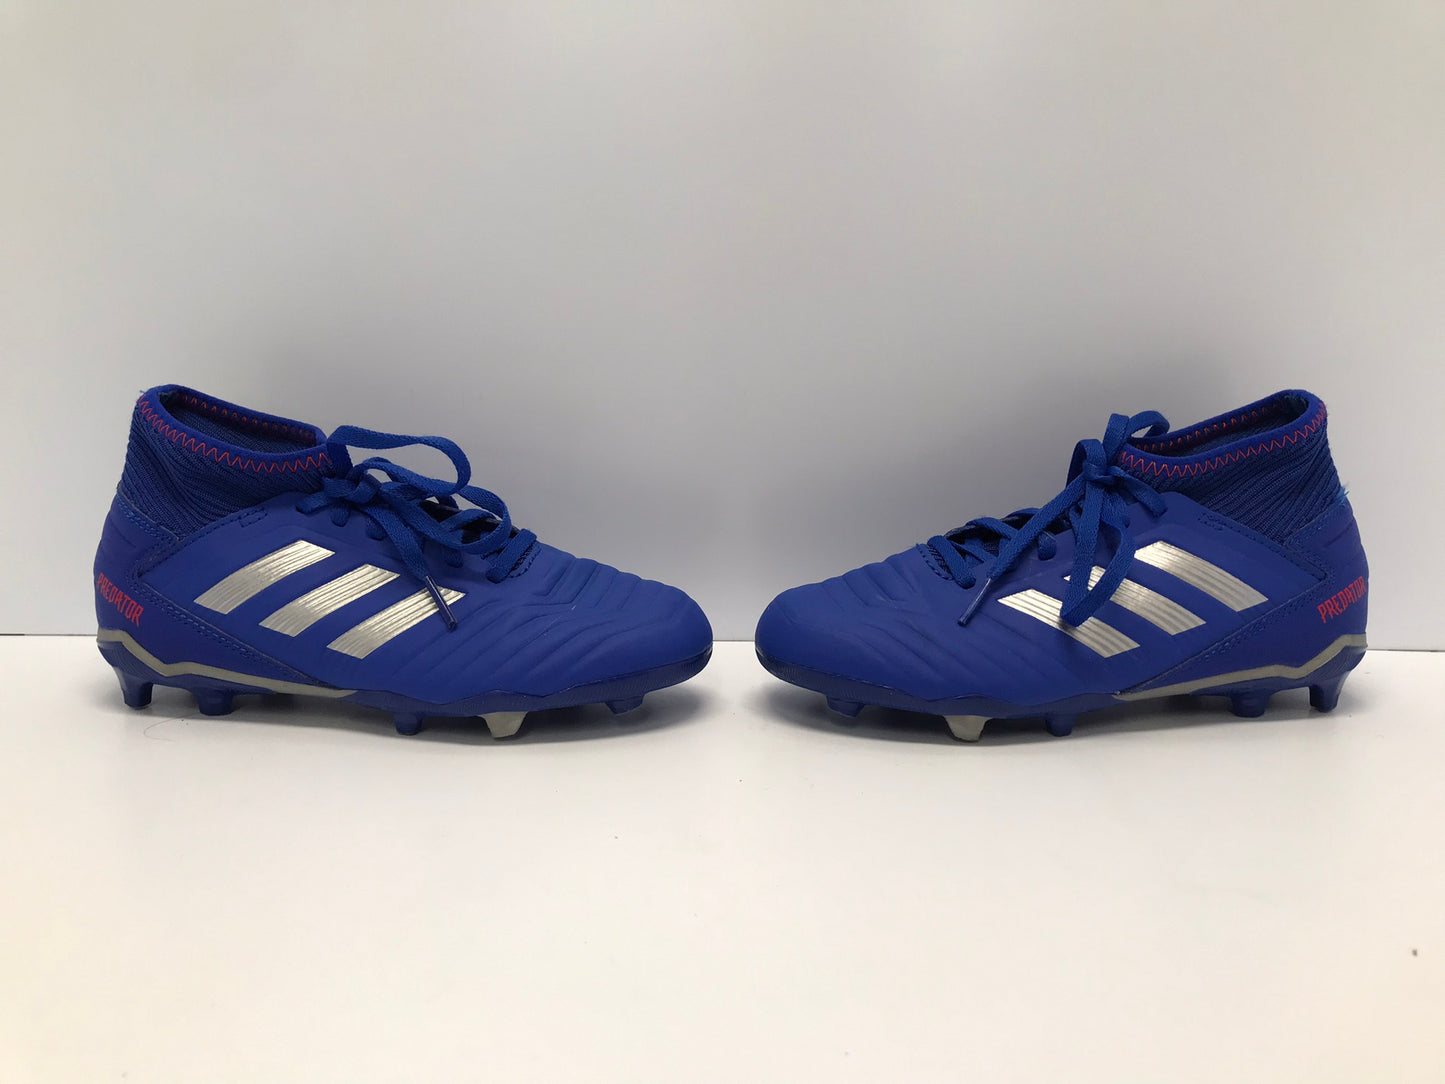 Soccer Shoes Cleats Child Size 2 Adidas Preditor Blue Fushia With Slipper Foot New Demo Model